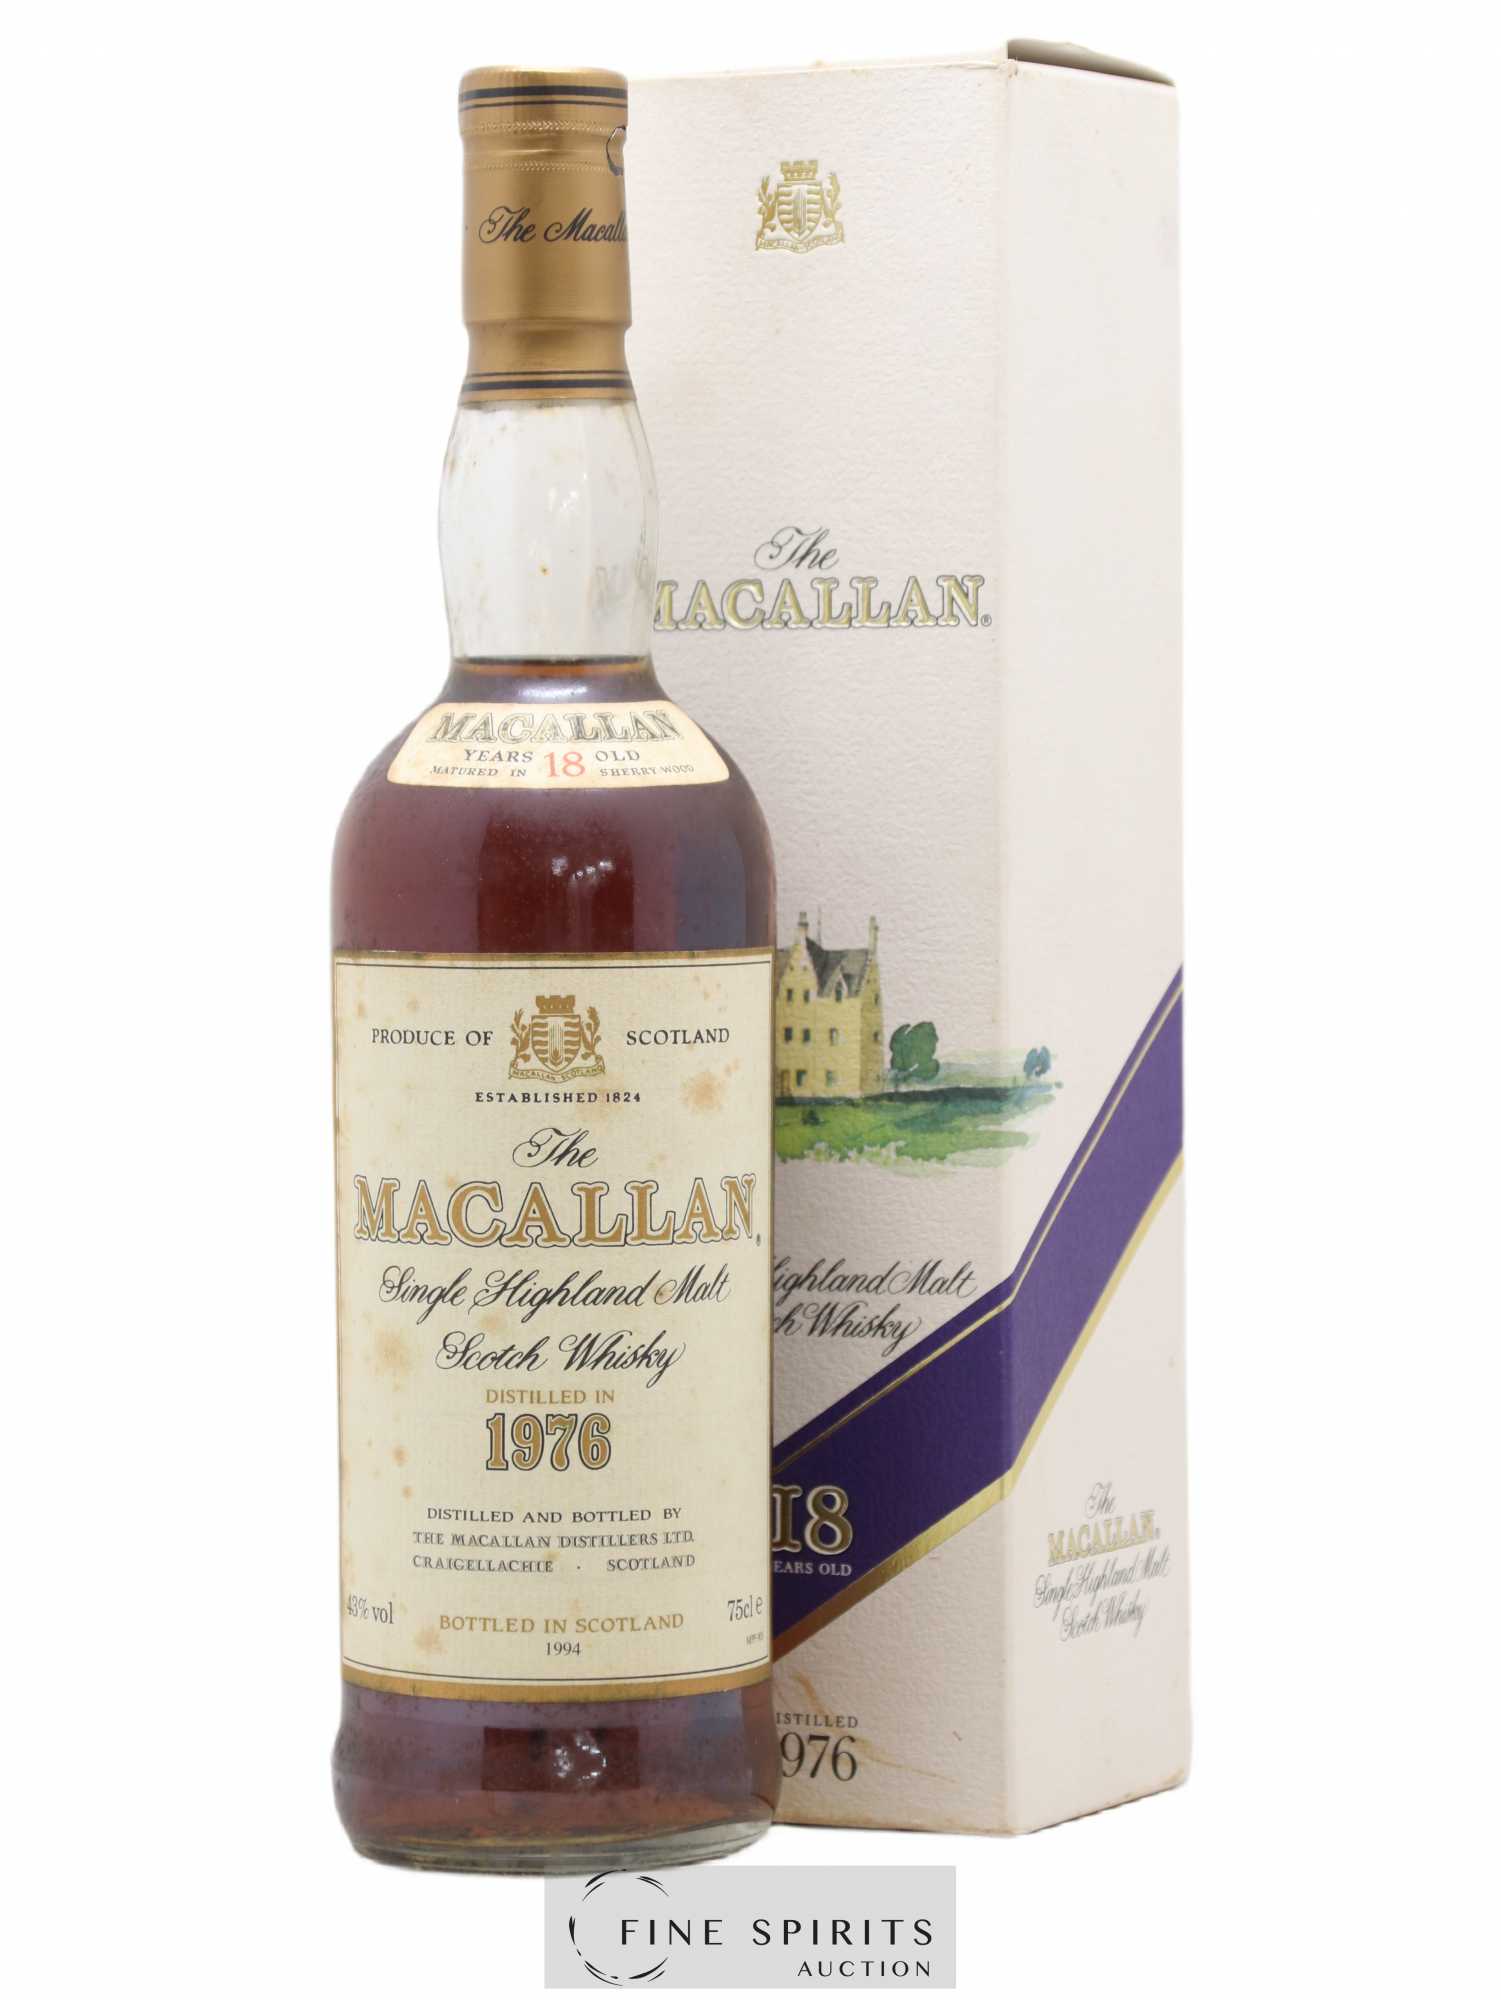 Macallan (The) 18 years 1976 Of. Sherry Wood Matured - bottled 1994 